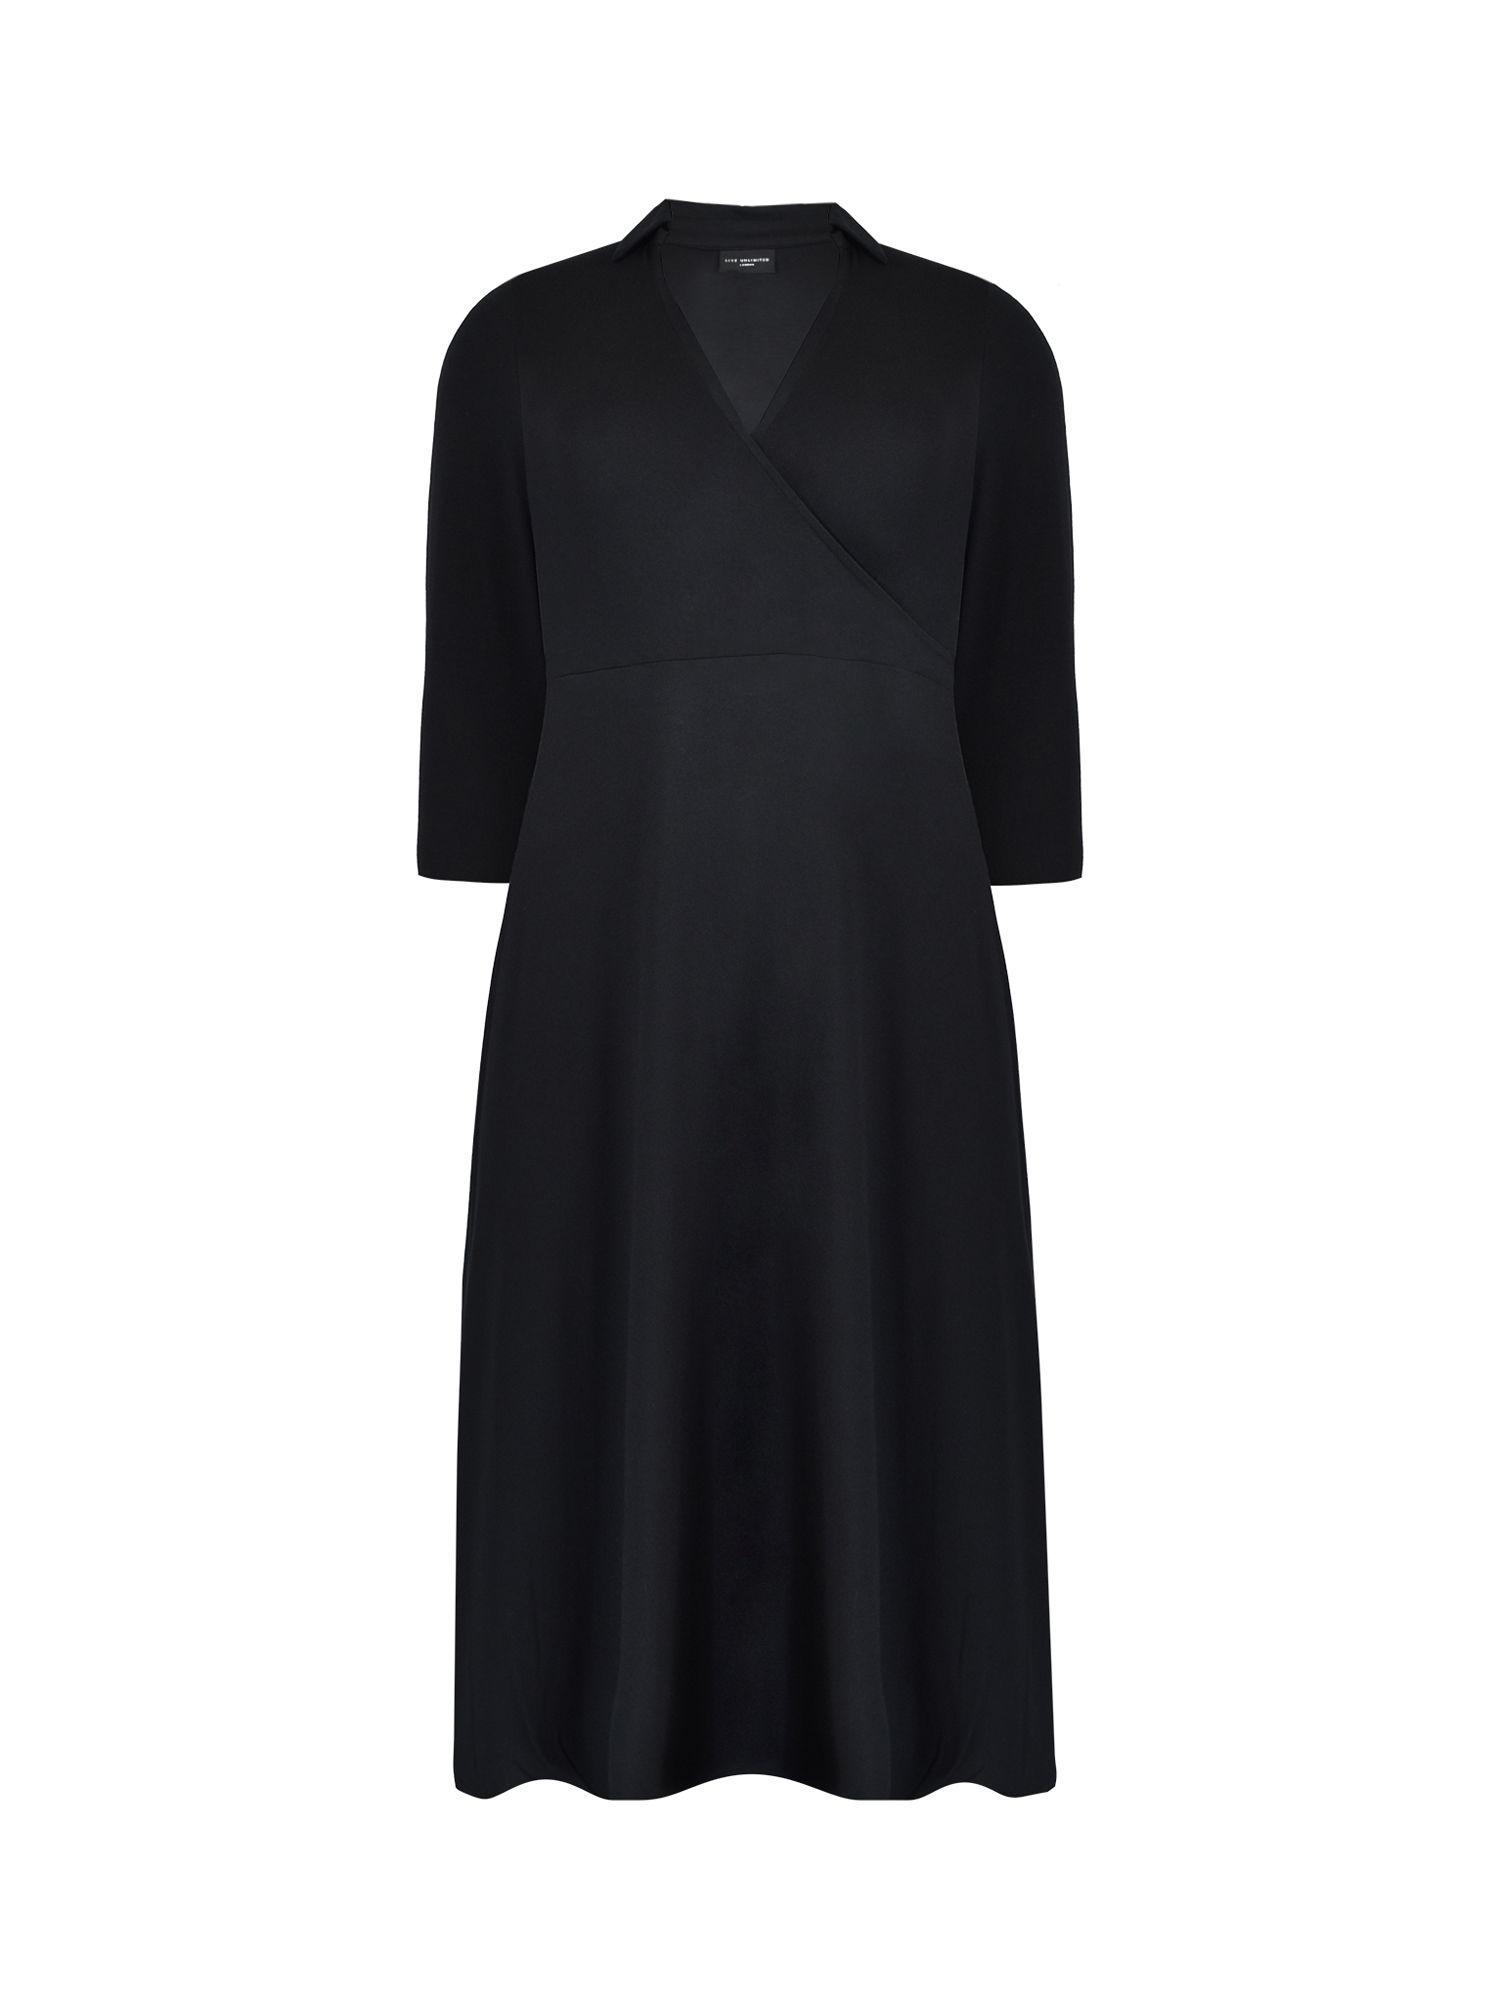 Buy Live Unlimited Jersey Wrap Dress With Collar, Black Online at johnlewis.com